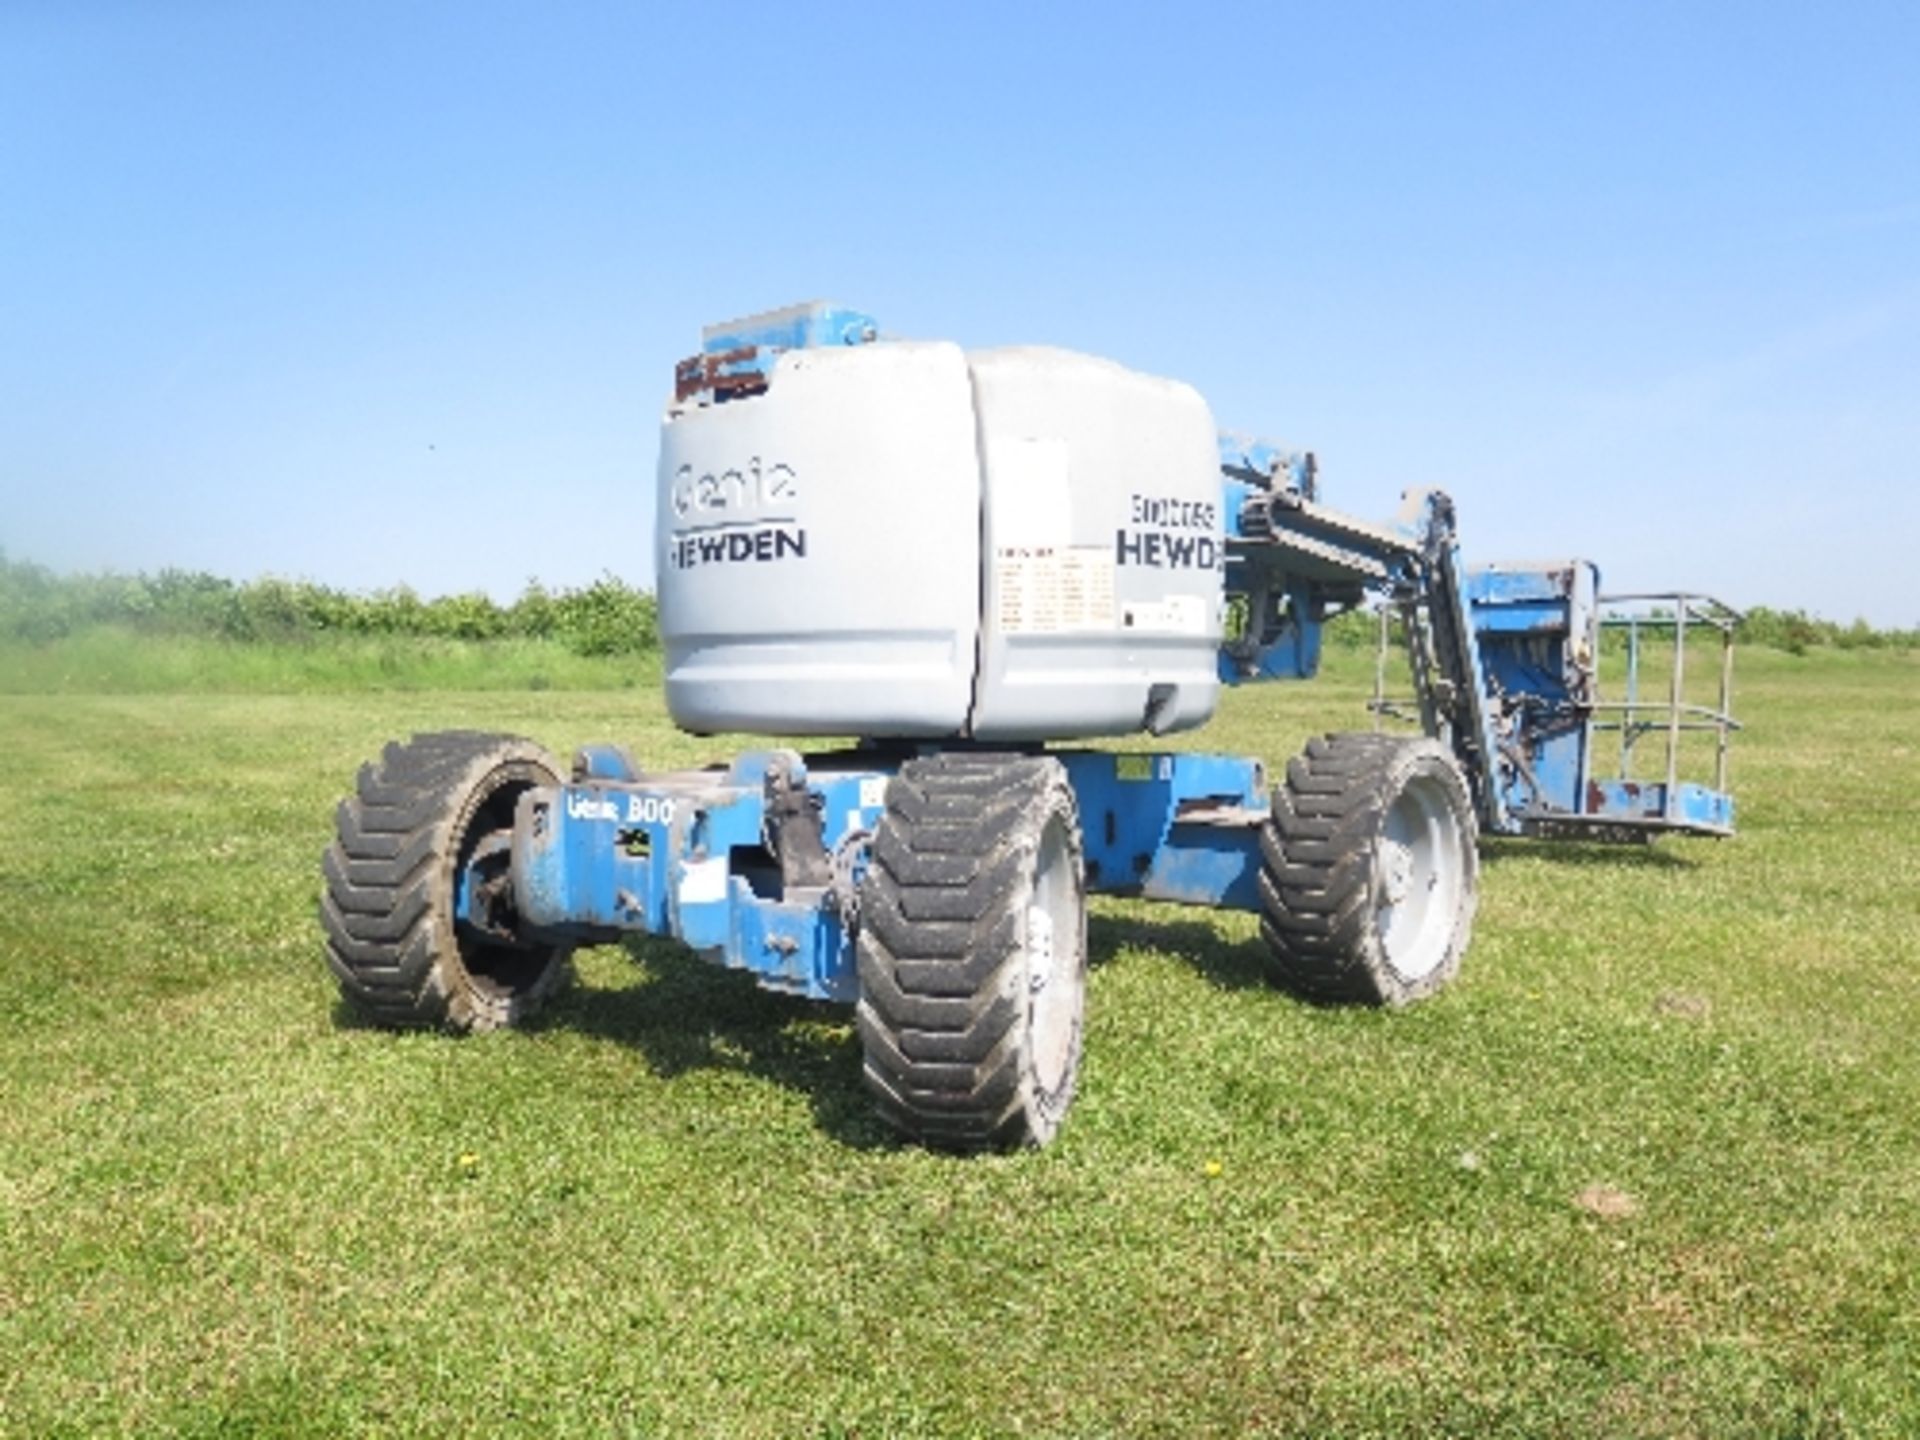 Genie Z45/25 artic boom 1481 hrs 2007 5000093ALL LOTS are SOLD AS SEEN WITHOUT WARRANTY expressed,